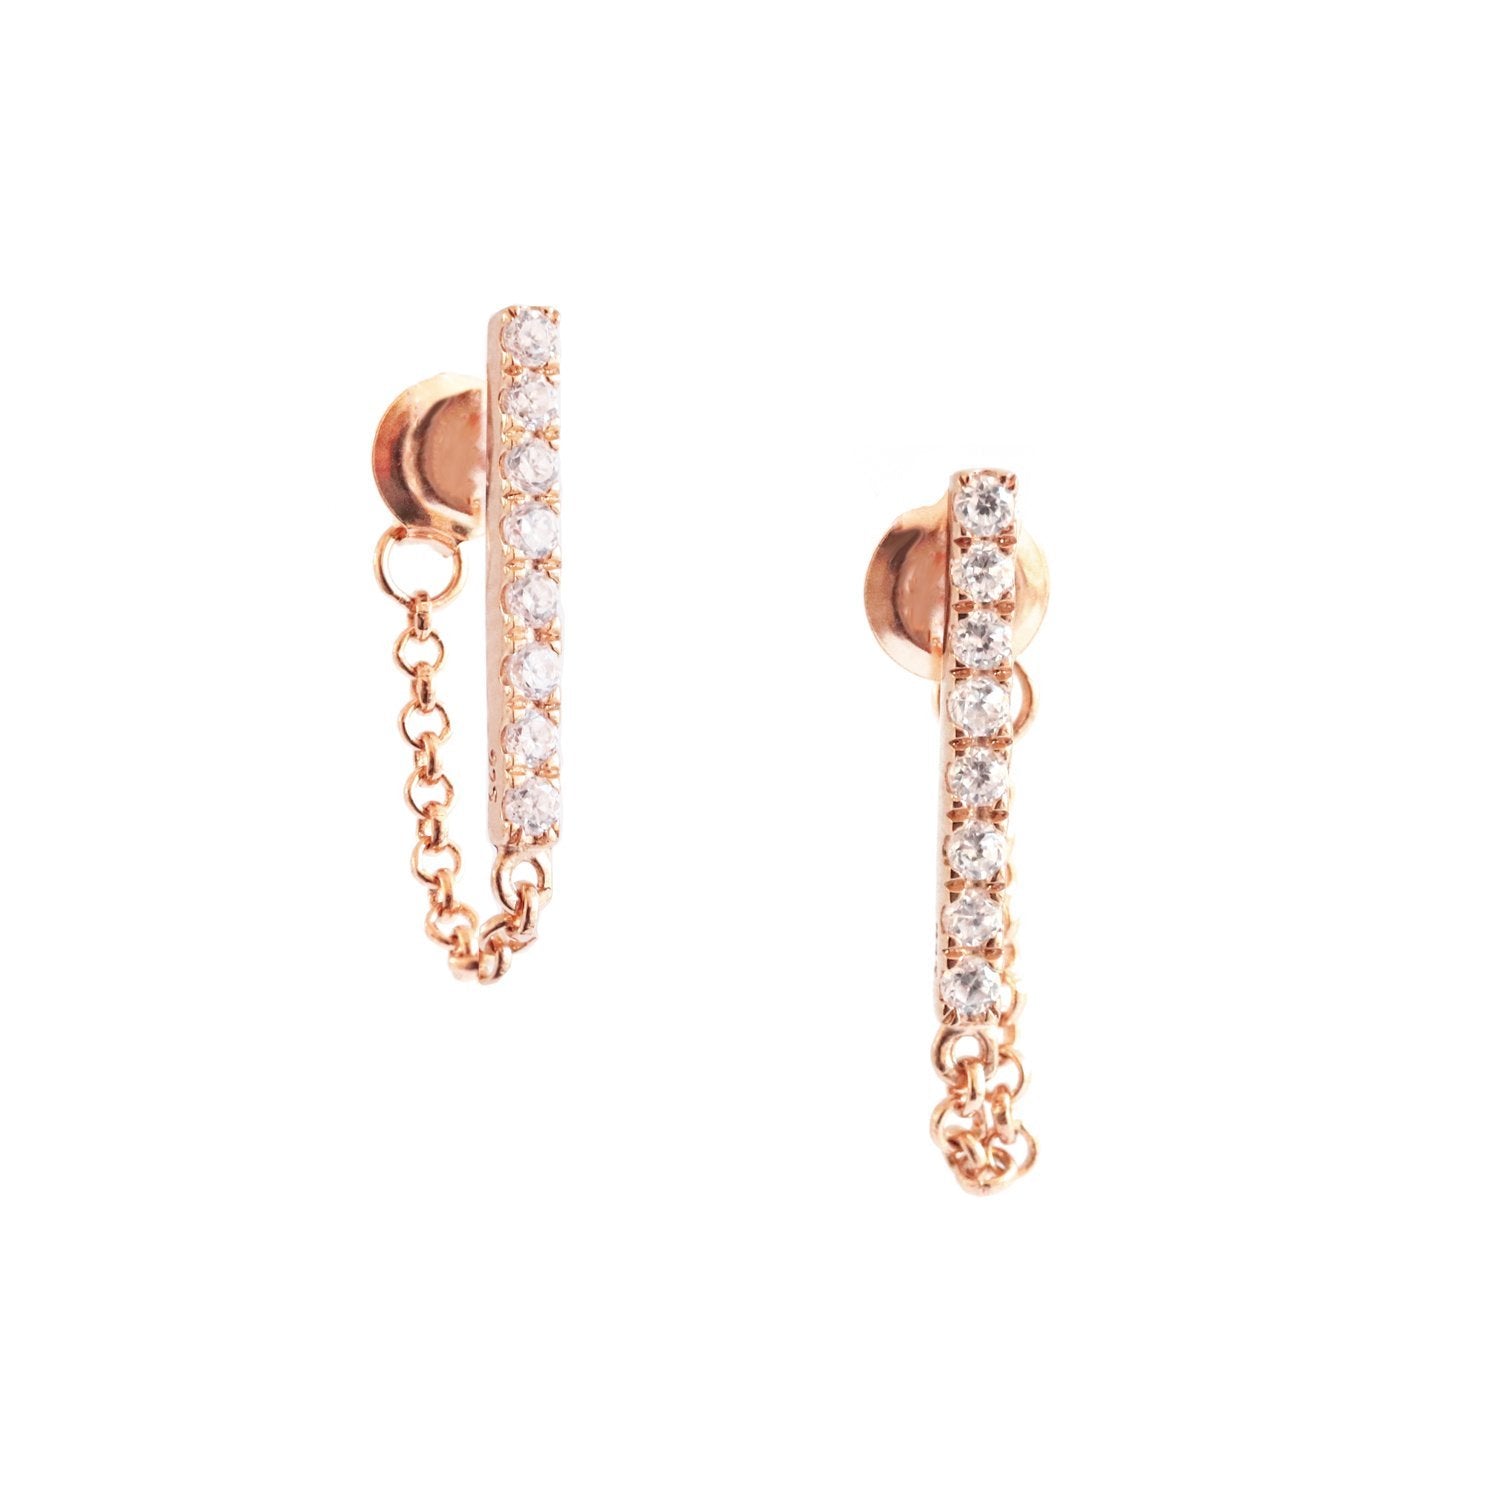 LOVE BAR CHAIN EARRINGS - CUBIC ZIRCONIA & ROSE GOLD - SO PRETTY CARA COTTER